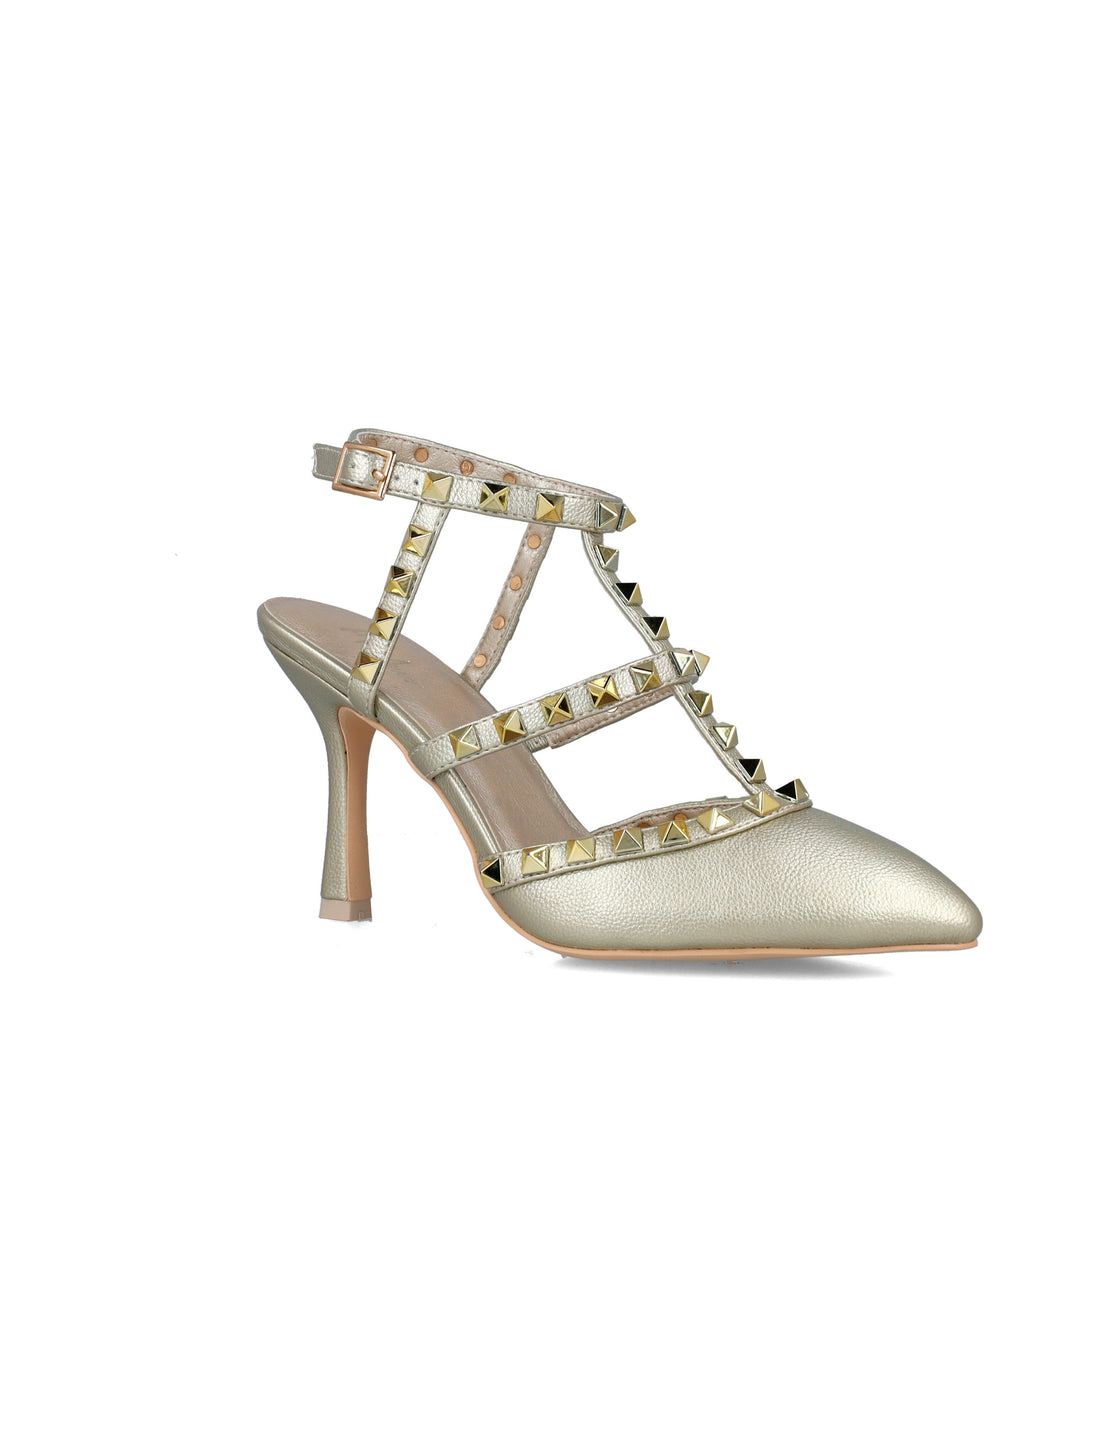 Gold Studded Pumps With T-Strap_24915_00_02